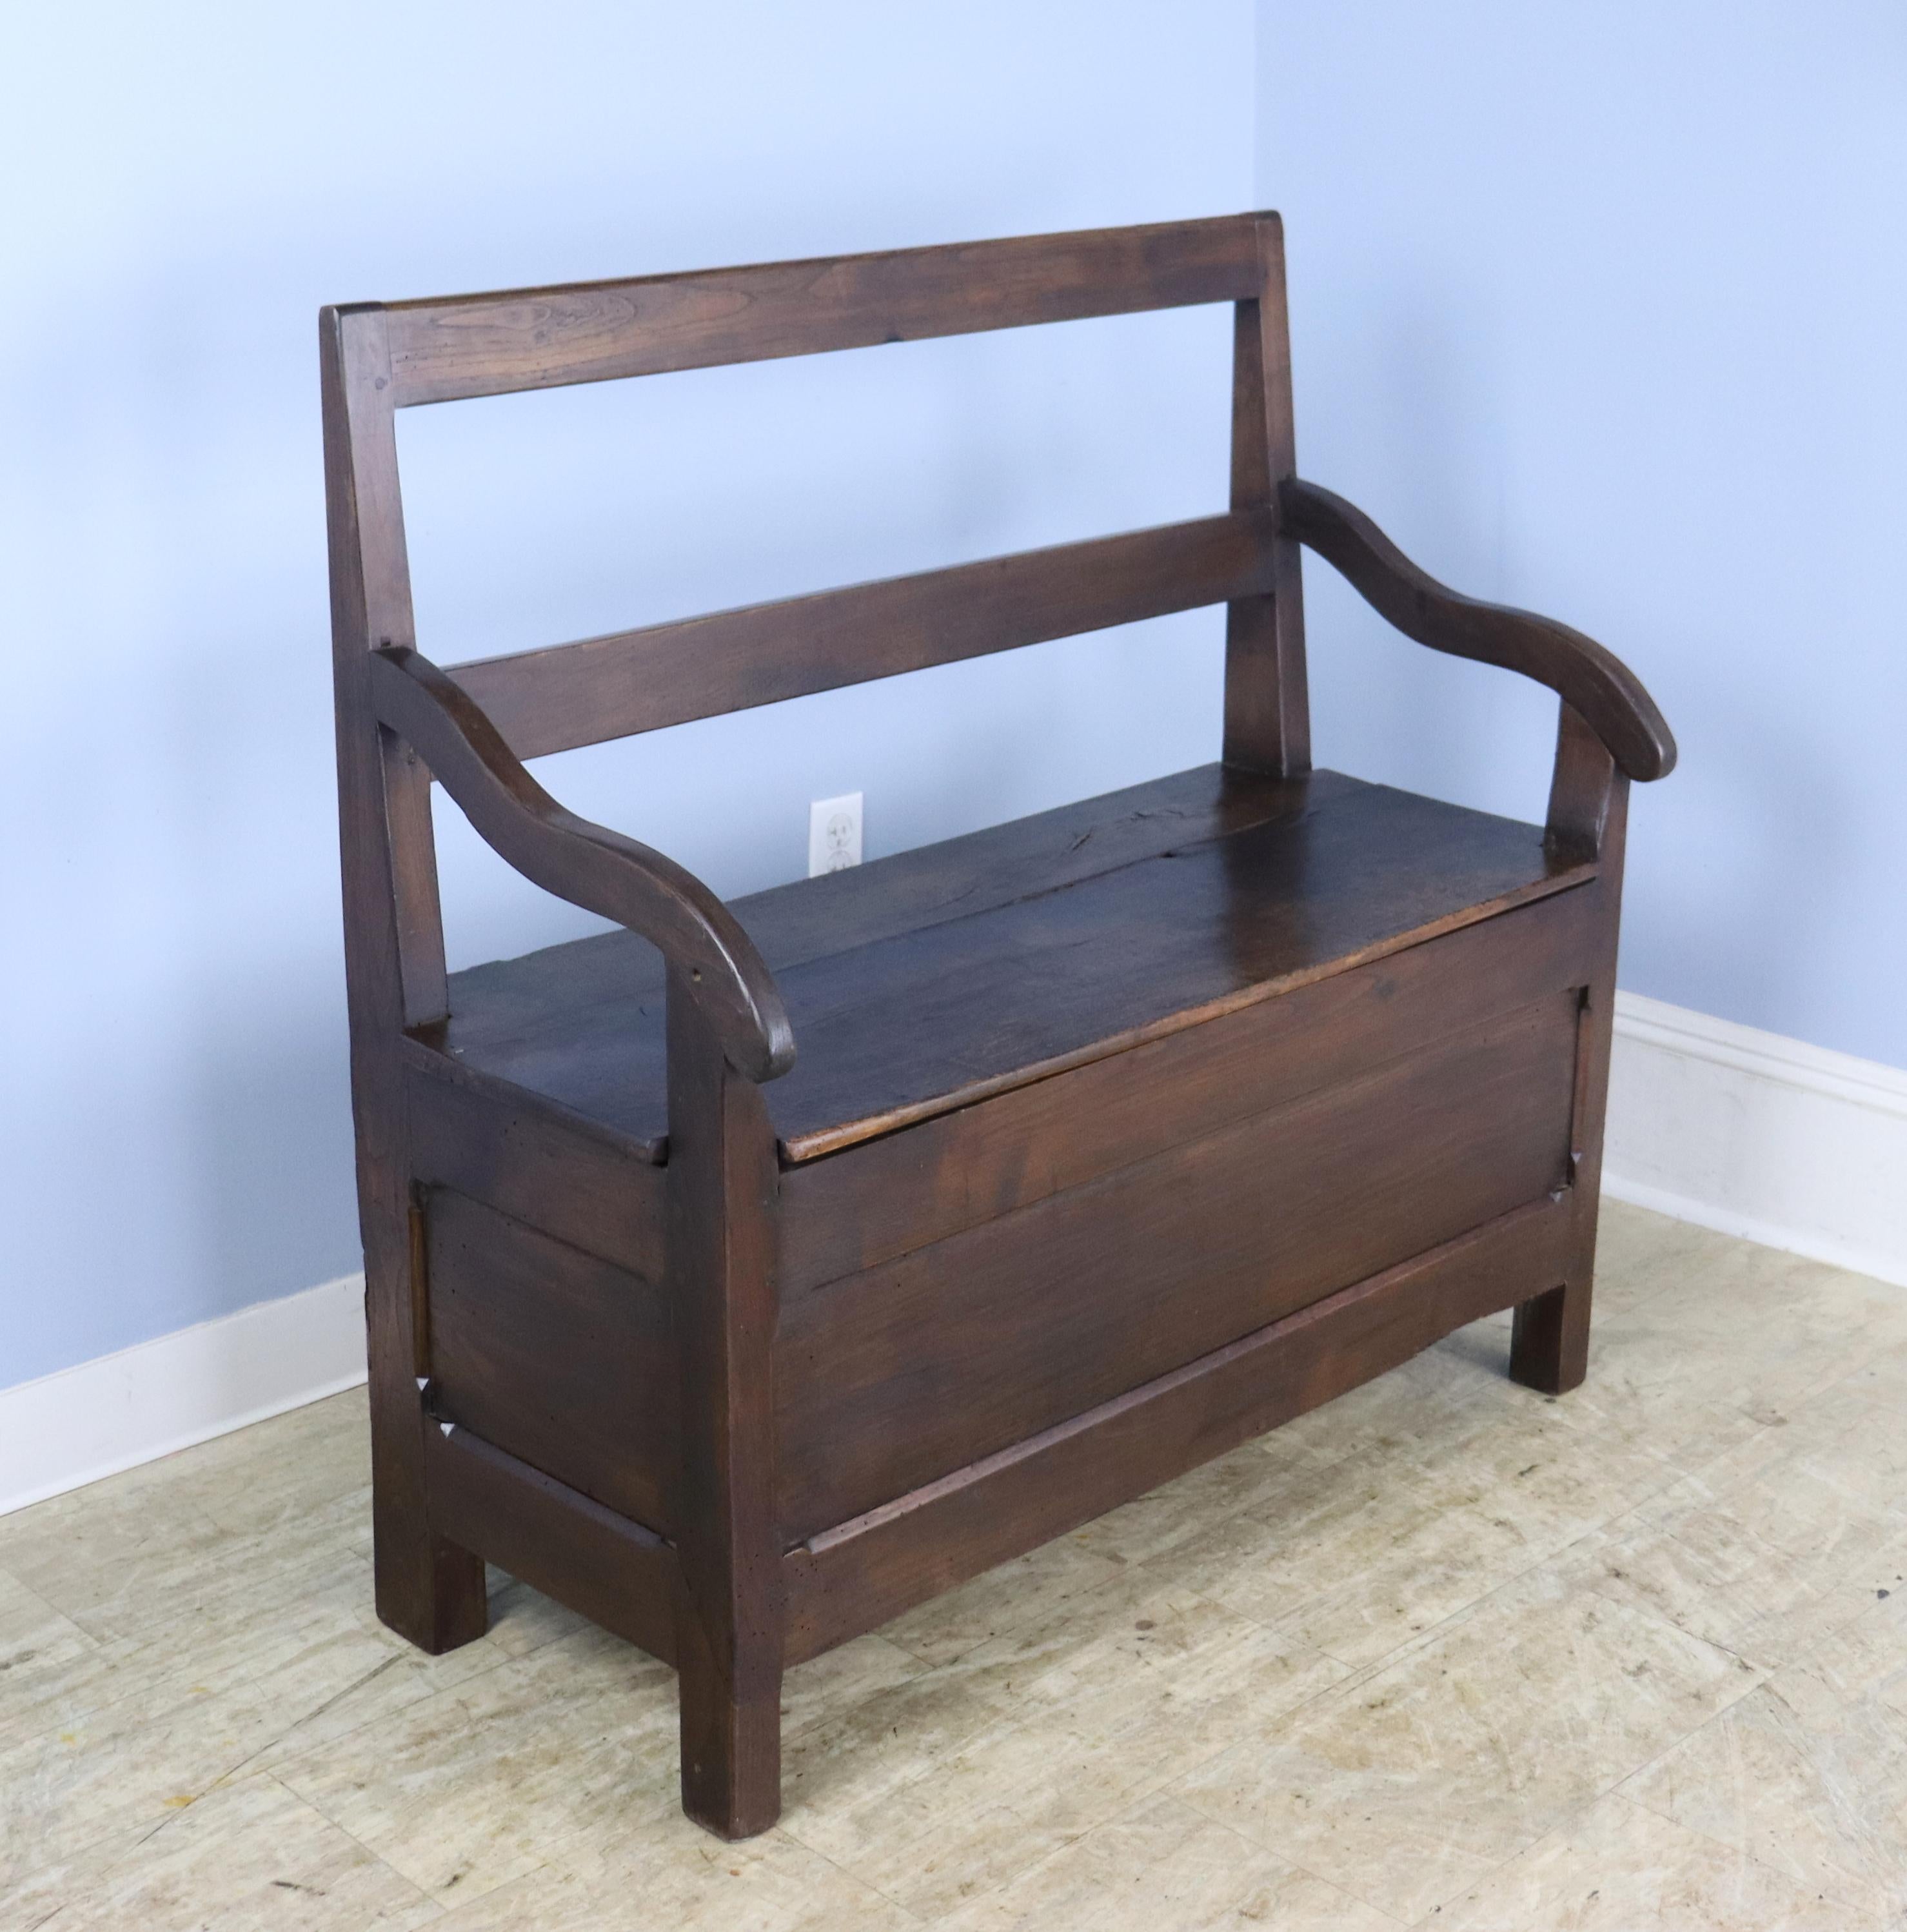 A handsome chestnut bench with charming sloping arms and a lift off lid with good storage.  The chestnut hads rich color and fine patina.  There are some areas of old wear, shown.  Would be right in a hallway or mudroom, or for any occasional